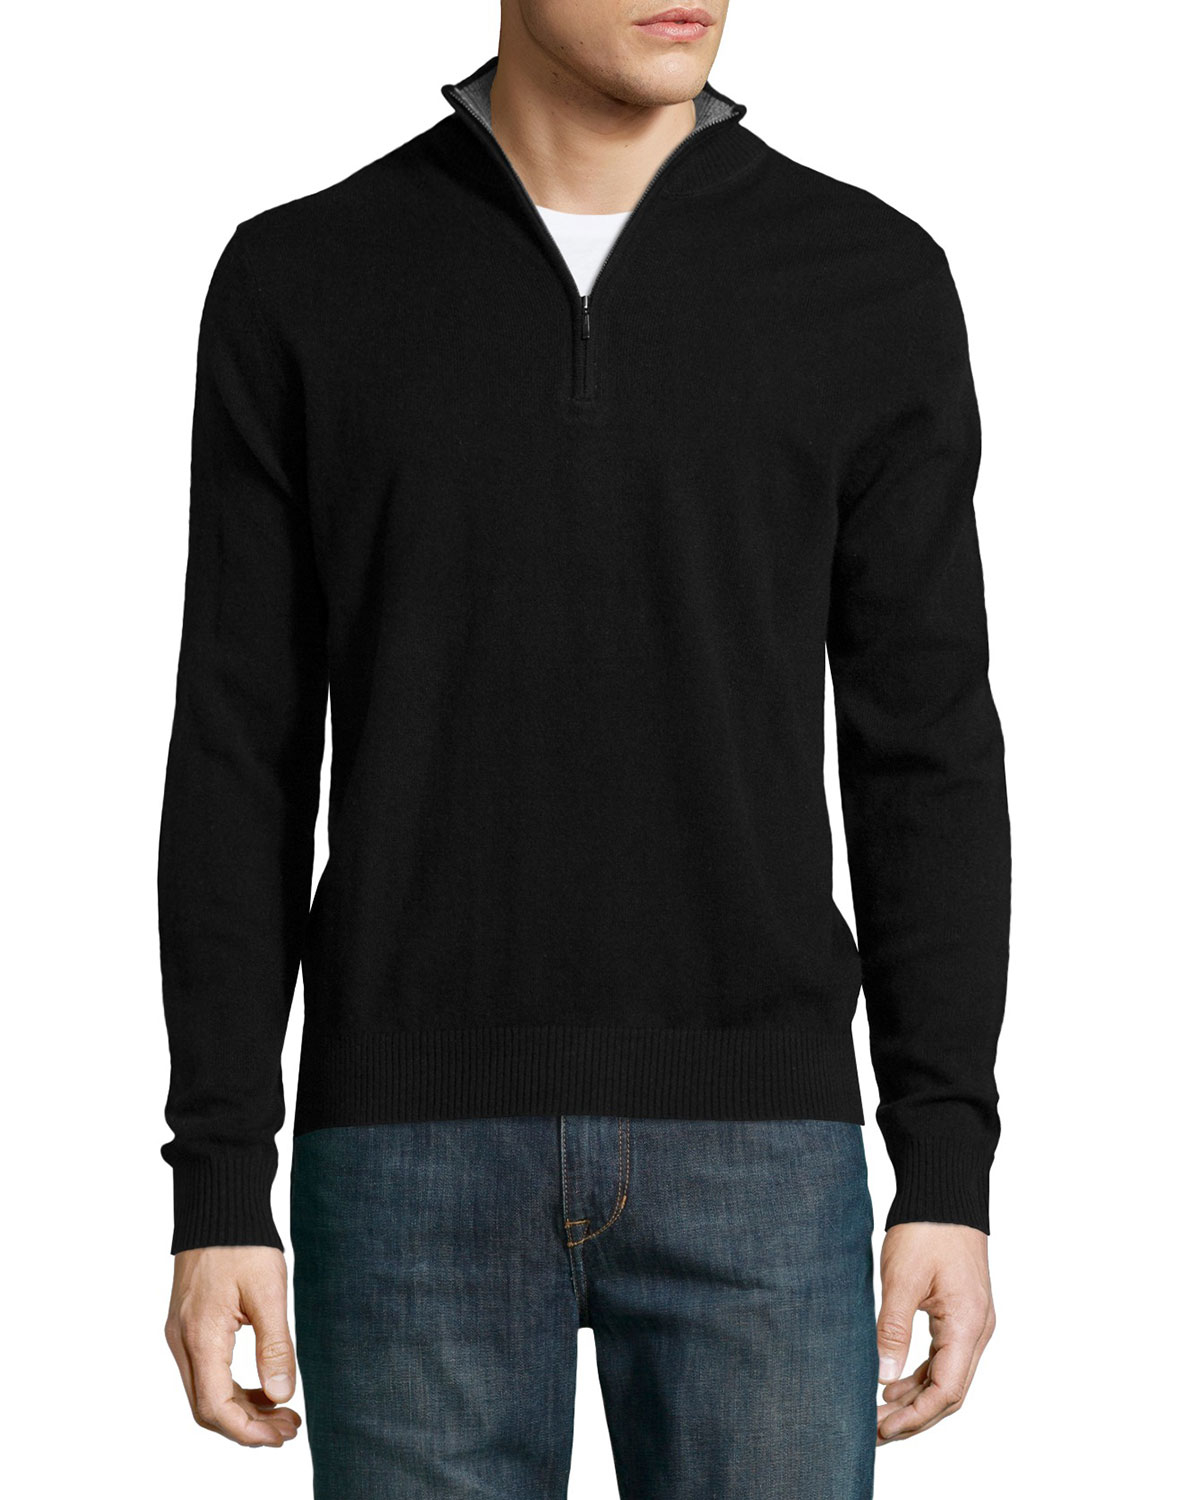 Lyst - Neiman Marcus Zip-front Cashmere Pullover Sweater in Black for Men